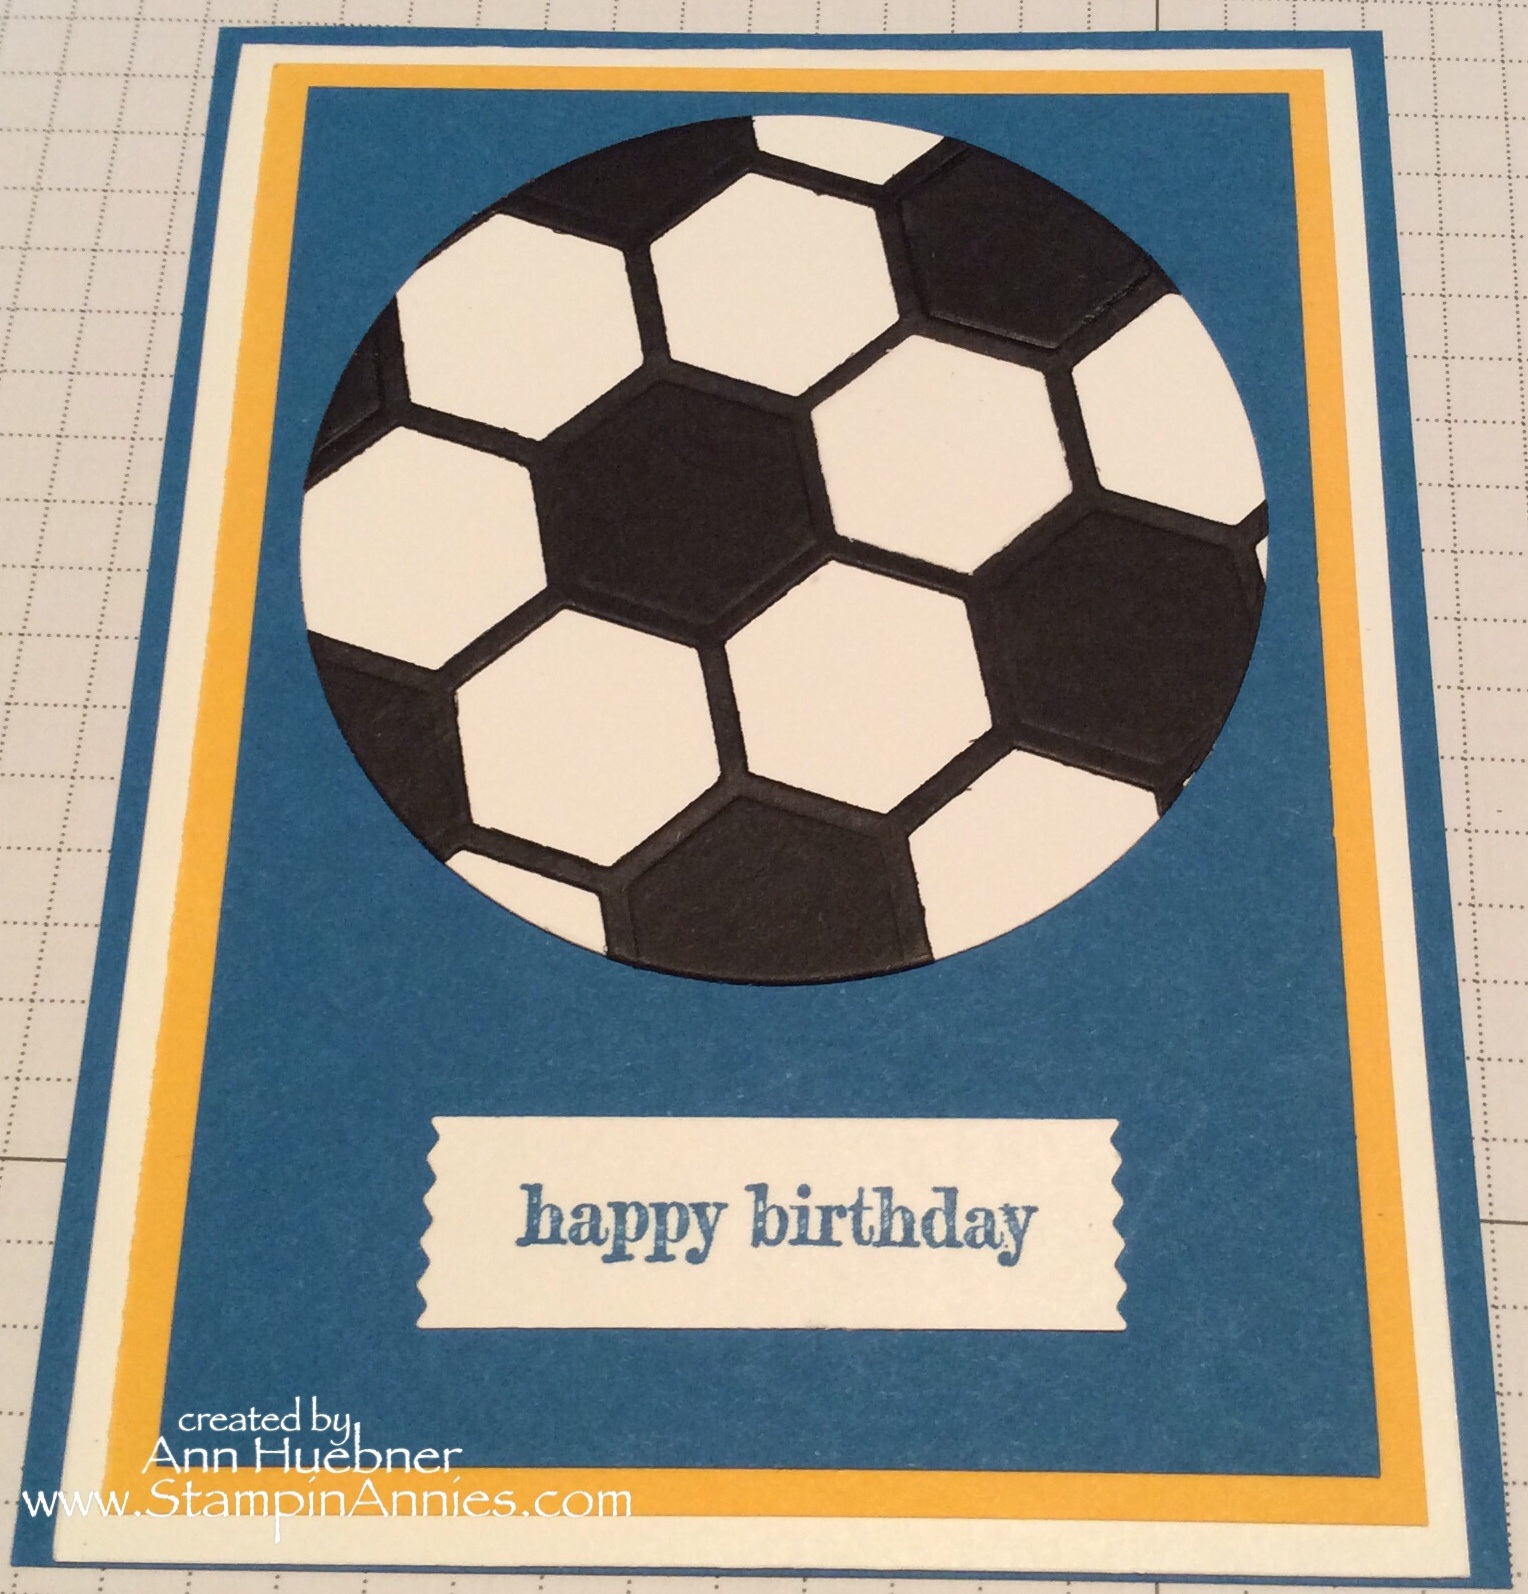 Learn how to make a Soccer Ball for your Soccer Card